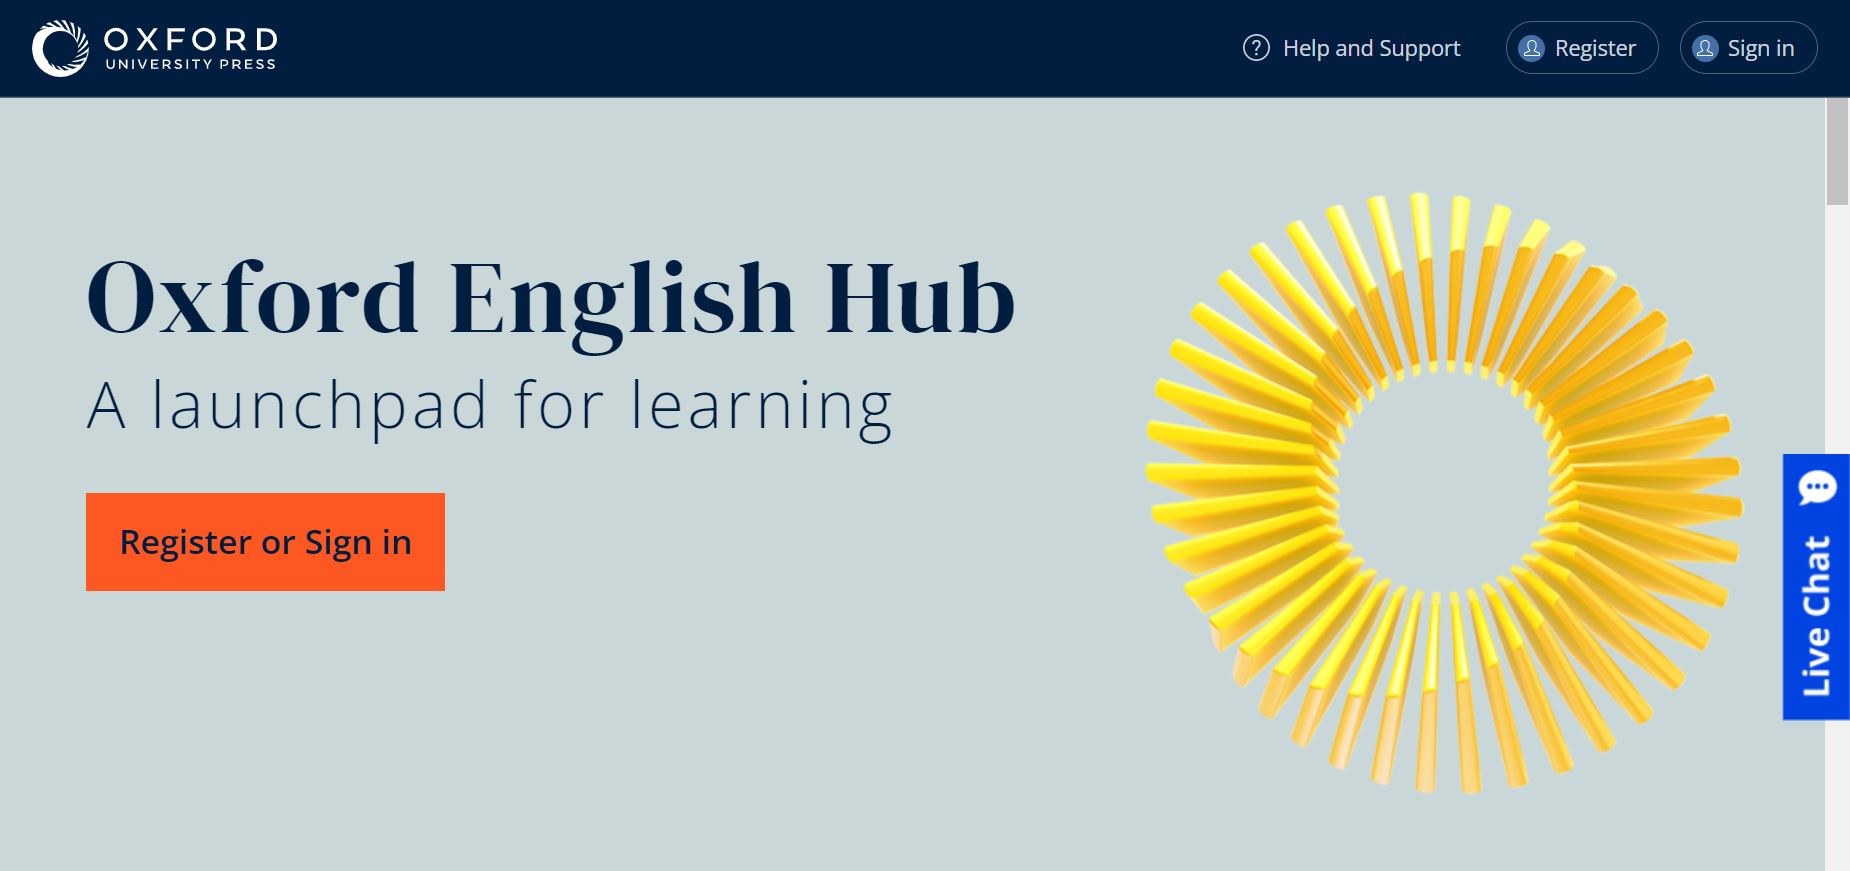 Homepage of Oxford English Hub with the text, "Oxford English Hub: A launchpad for learning."